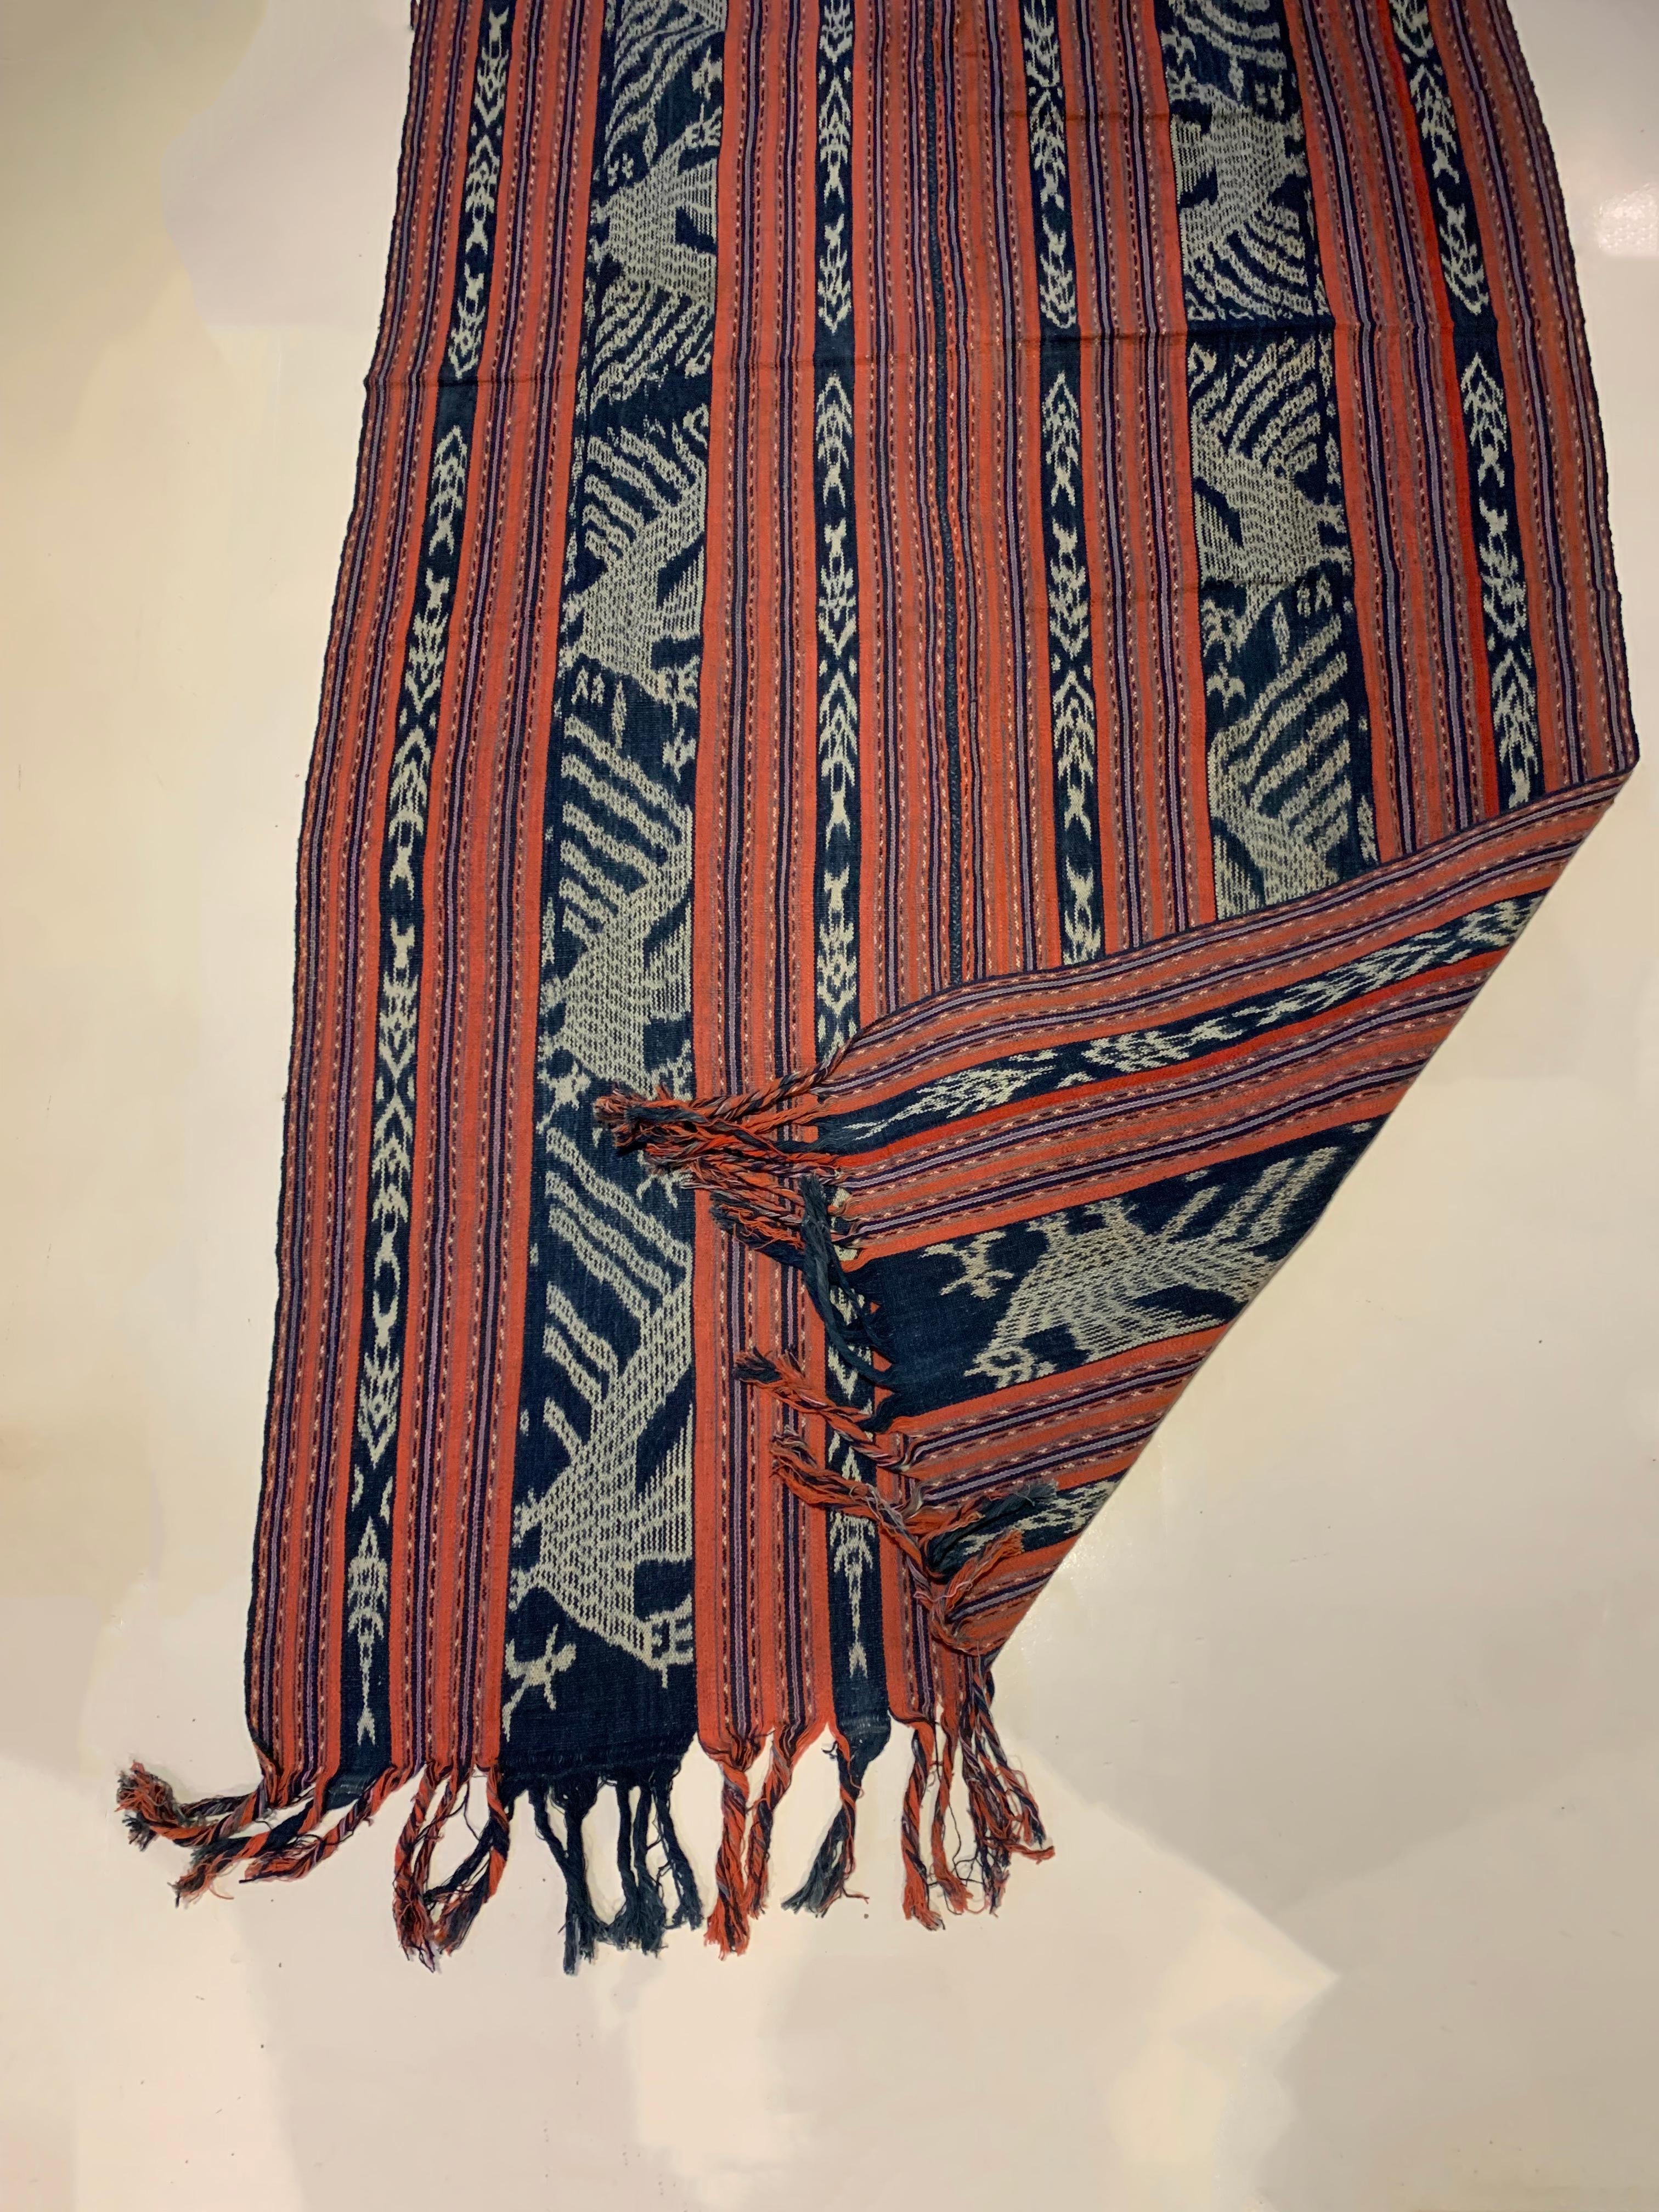 Ikat Textile from Timor Stunning Tribal Motifs & Colors, Indonesia, c. 1950 For Sale 1